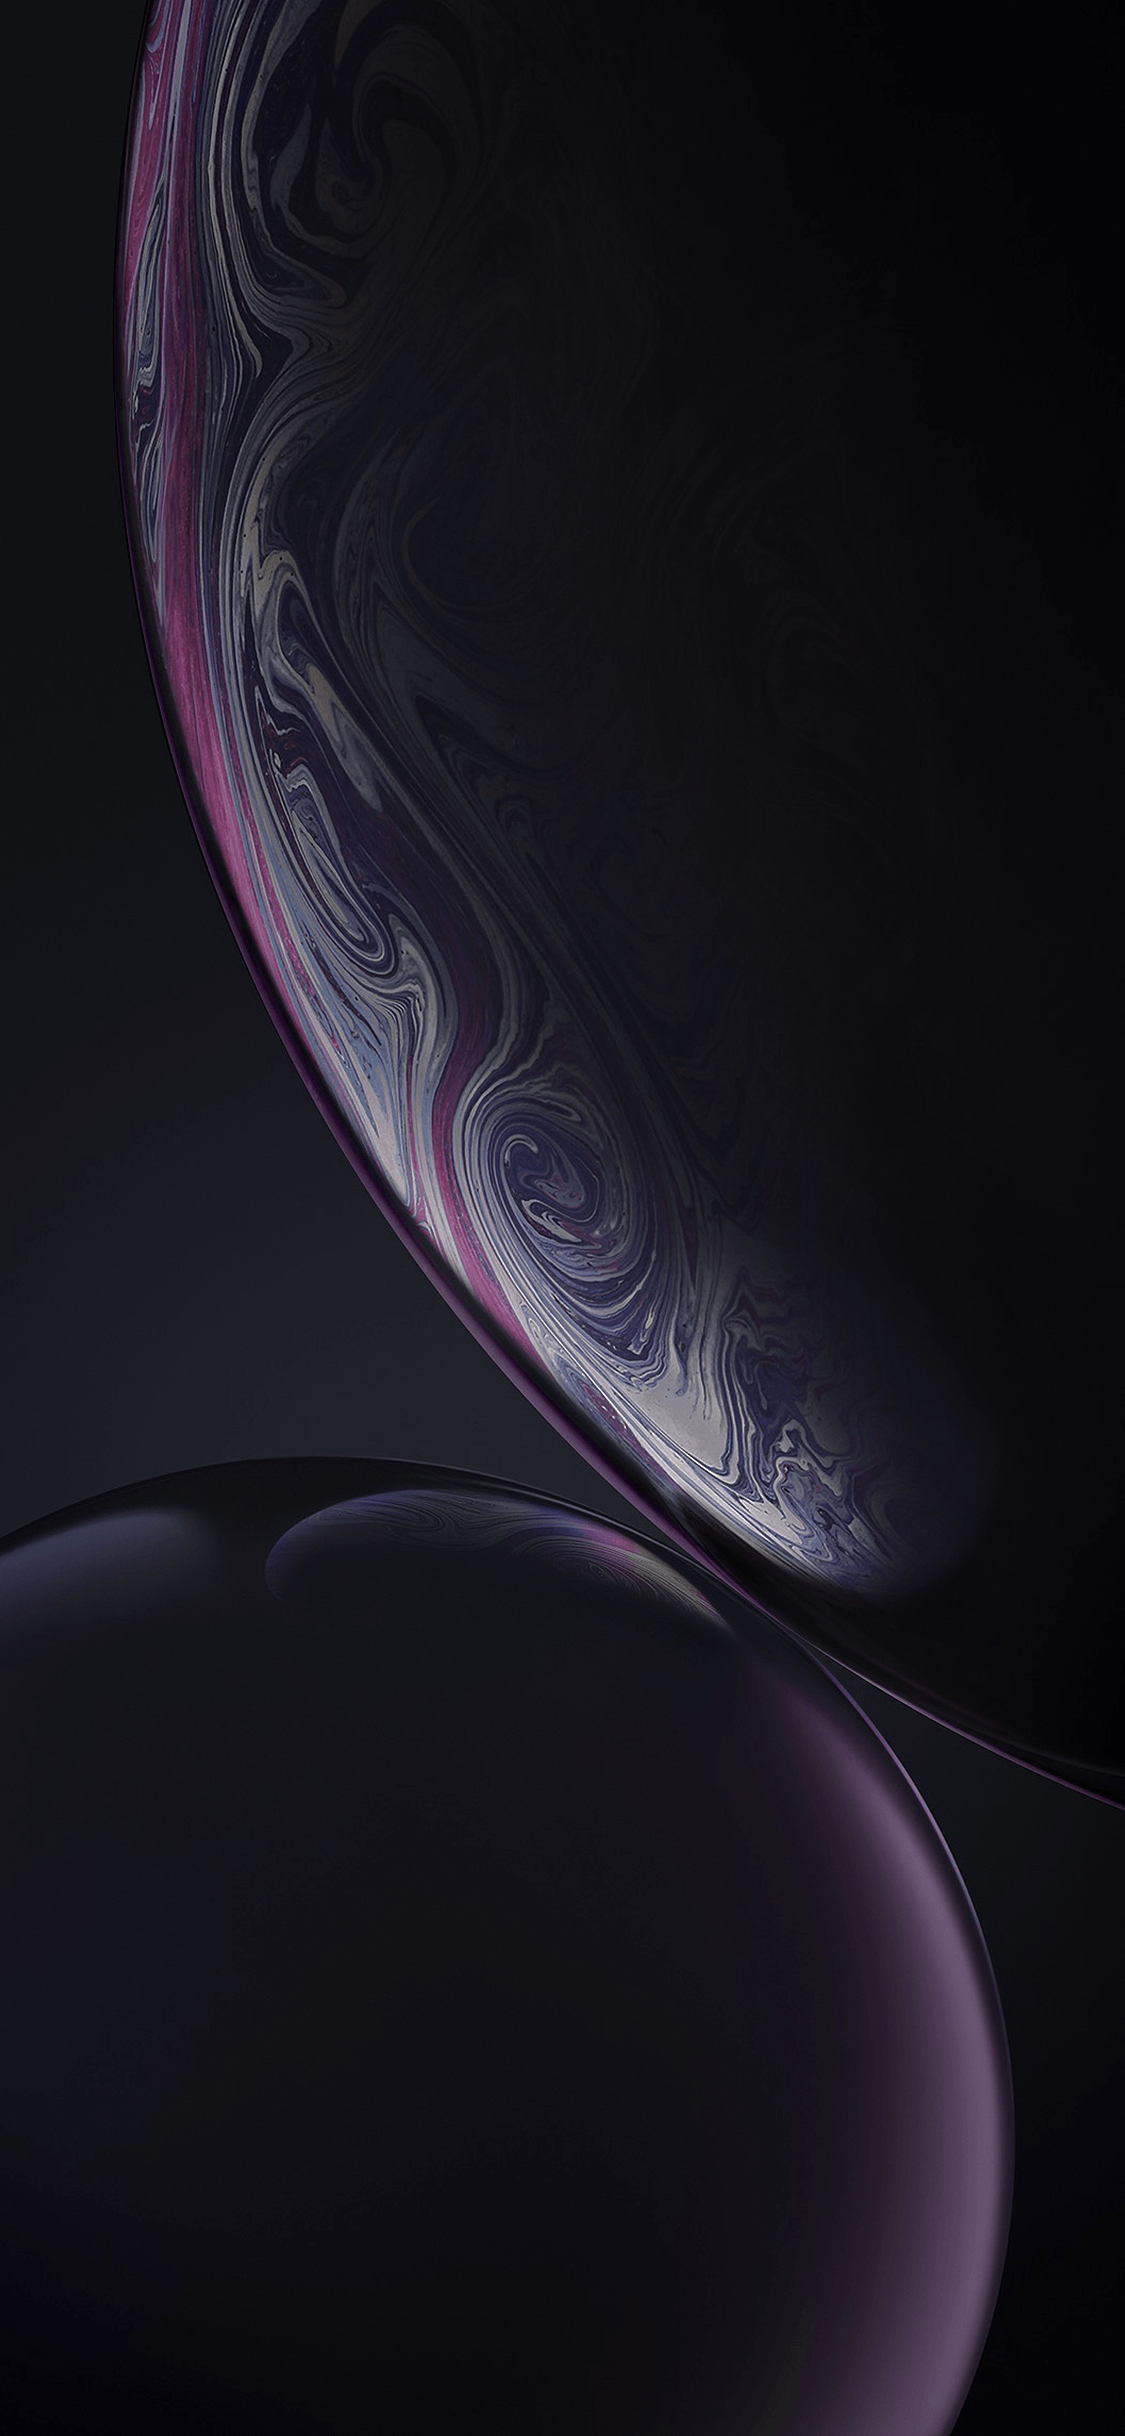 Live iPhone XS Wallpapers on WallpaperDog